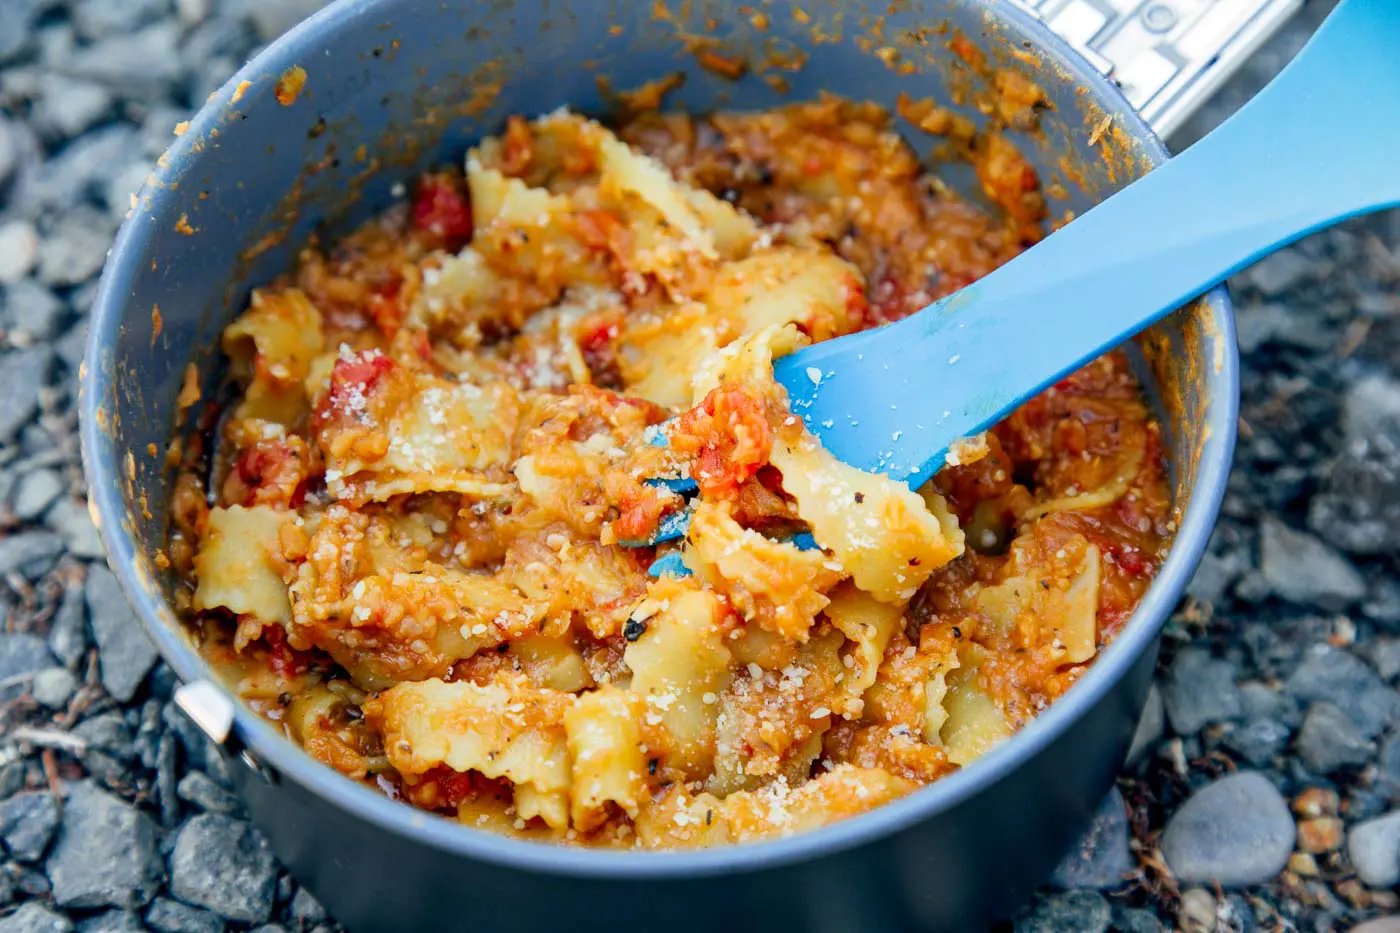 Red lentil marinara and pasta in a backpacking pot with a blue spoon